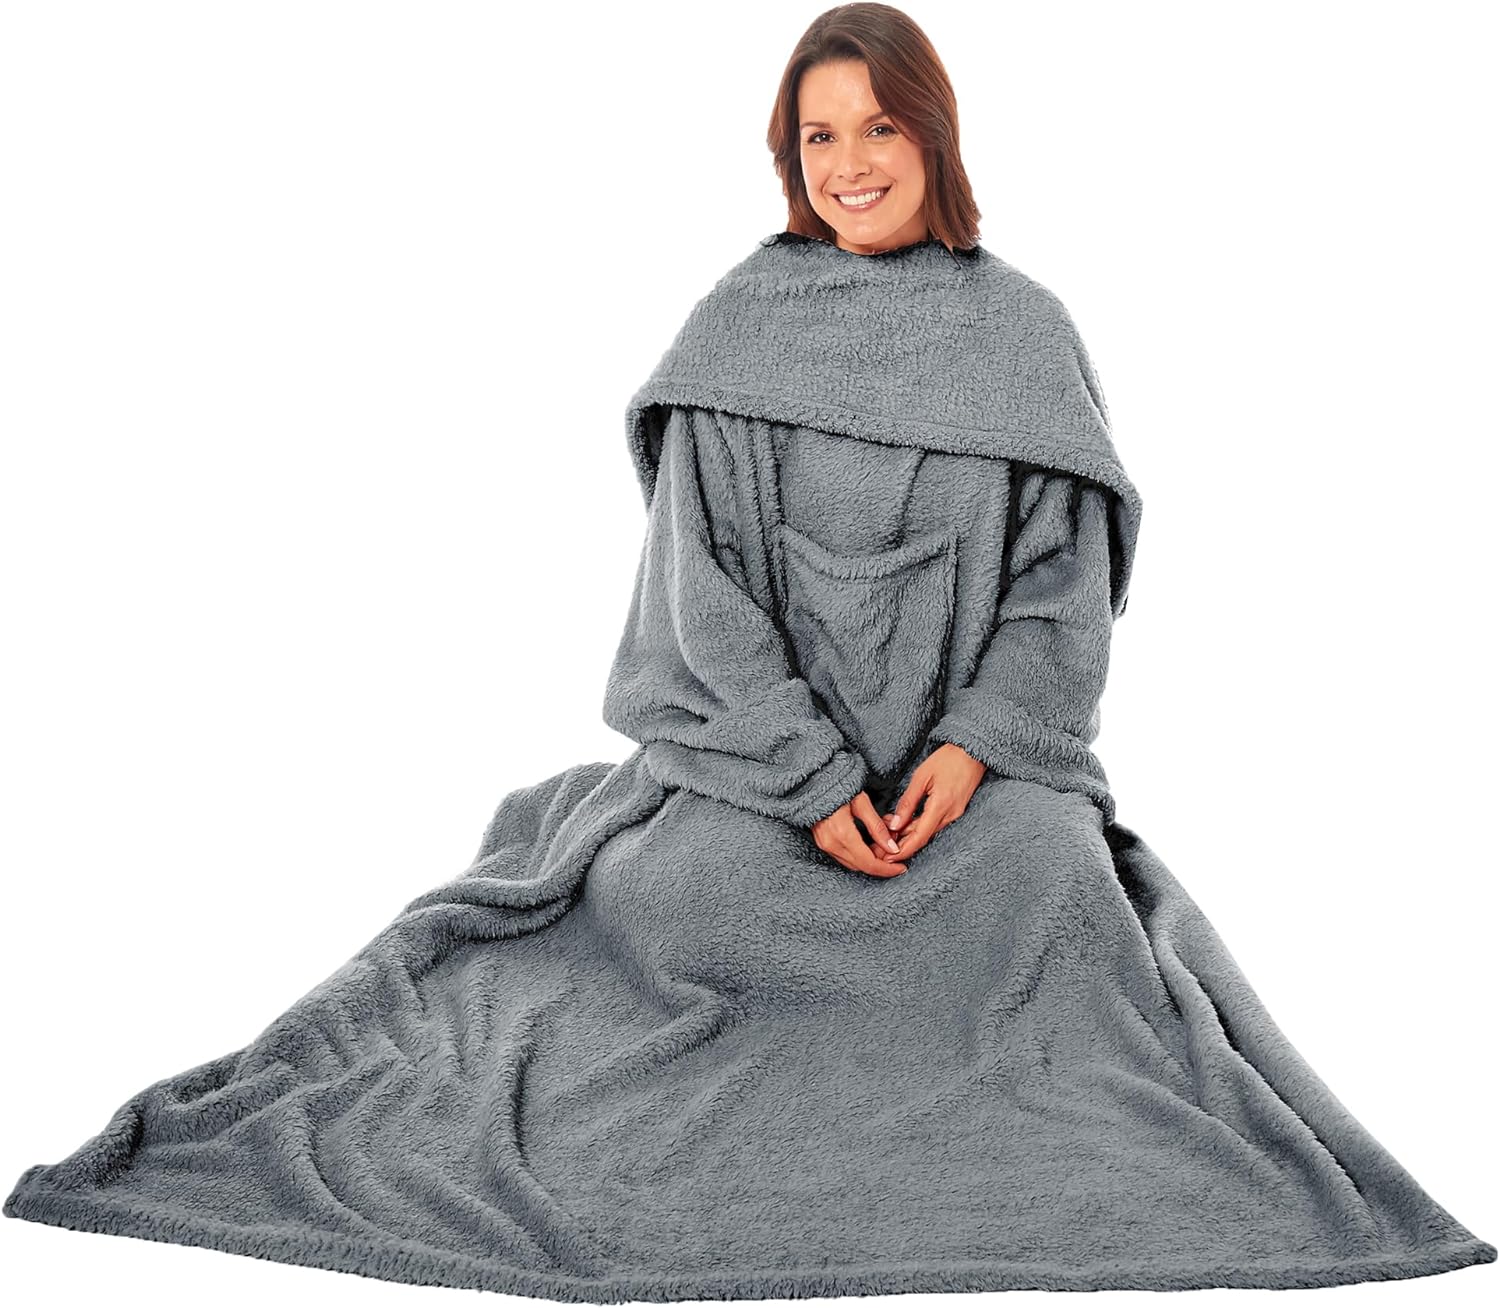 Wearable TV Blanket with Sleeves & Pocket, Soft Warm Cosy Fleece Unisex Adults Winter Throw Blankets for Sofa Bed Couch